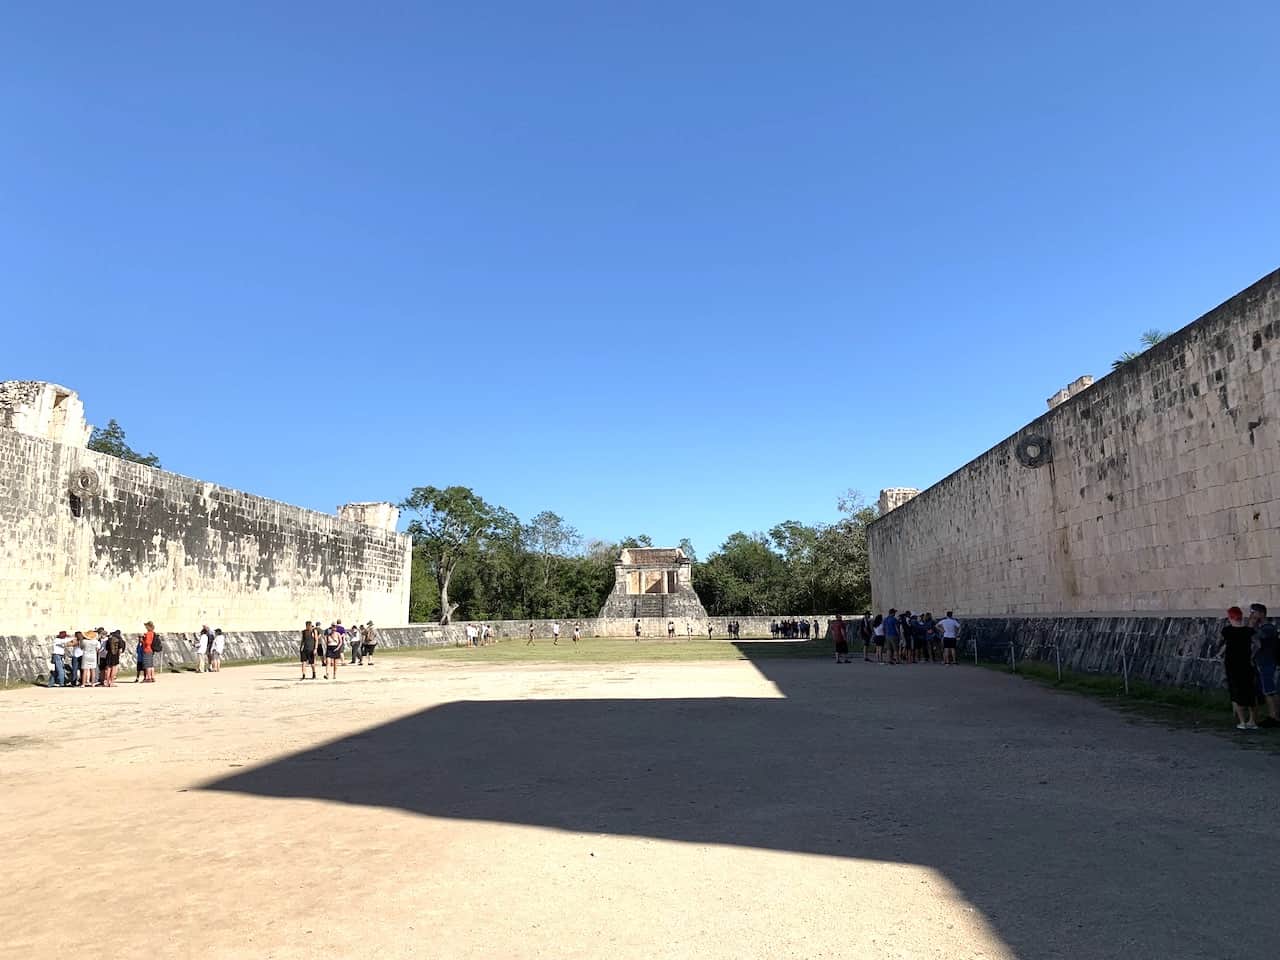 The Great Ball Court